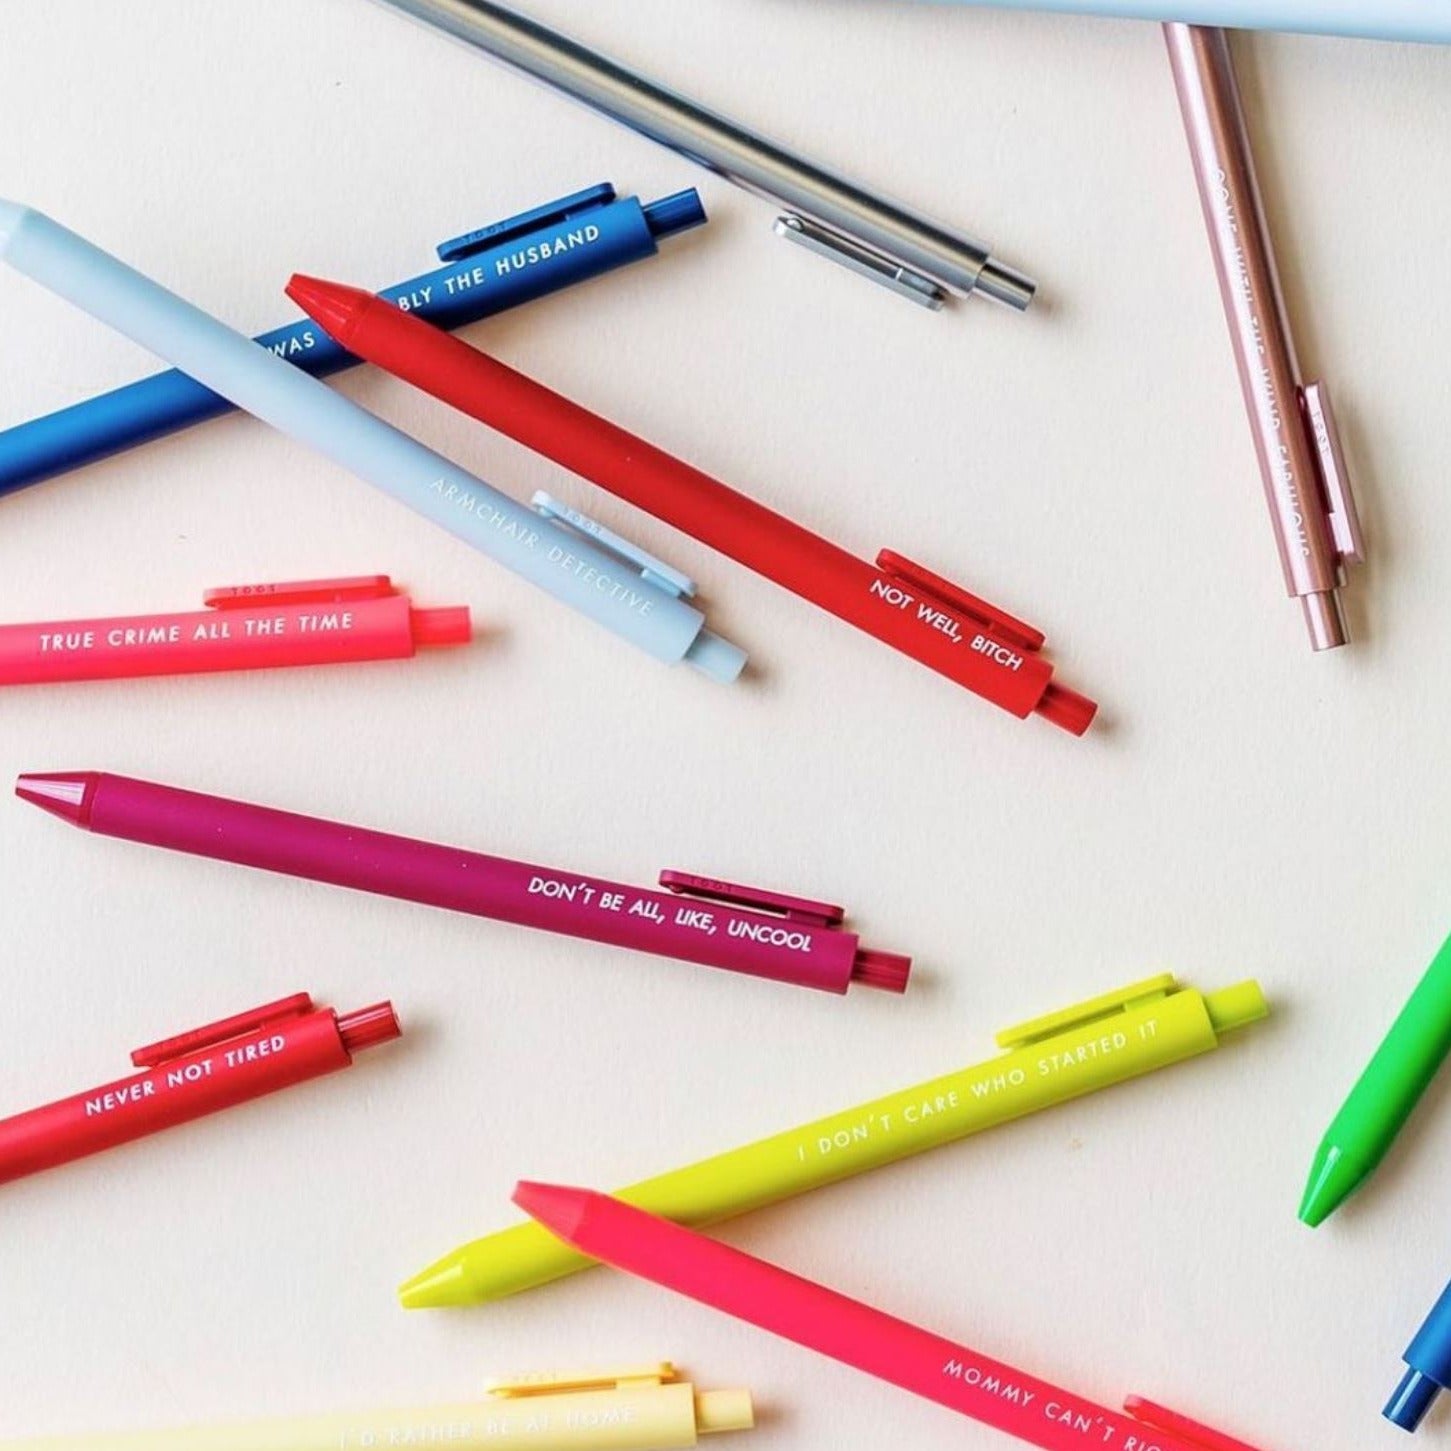 Pens for Introverts